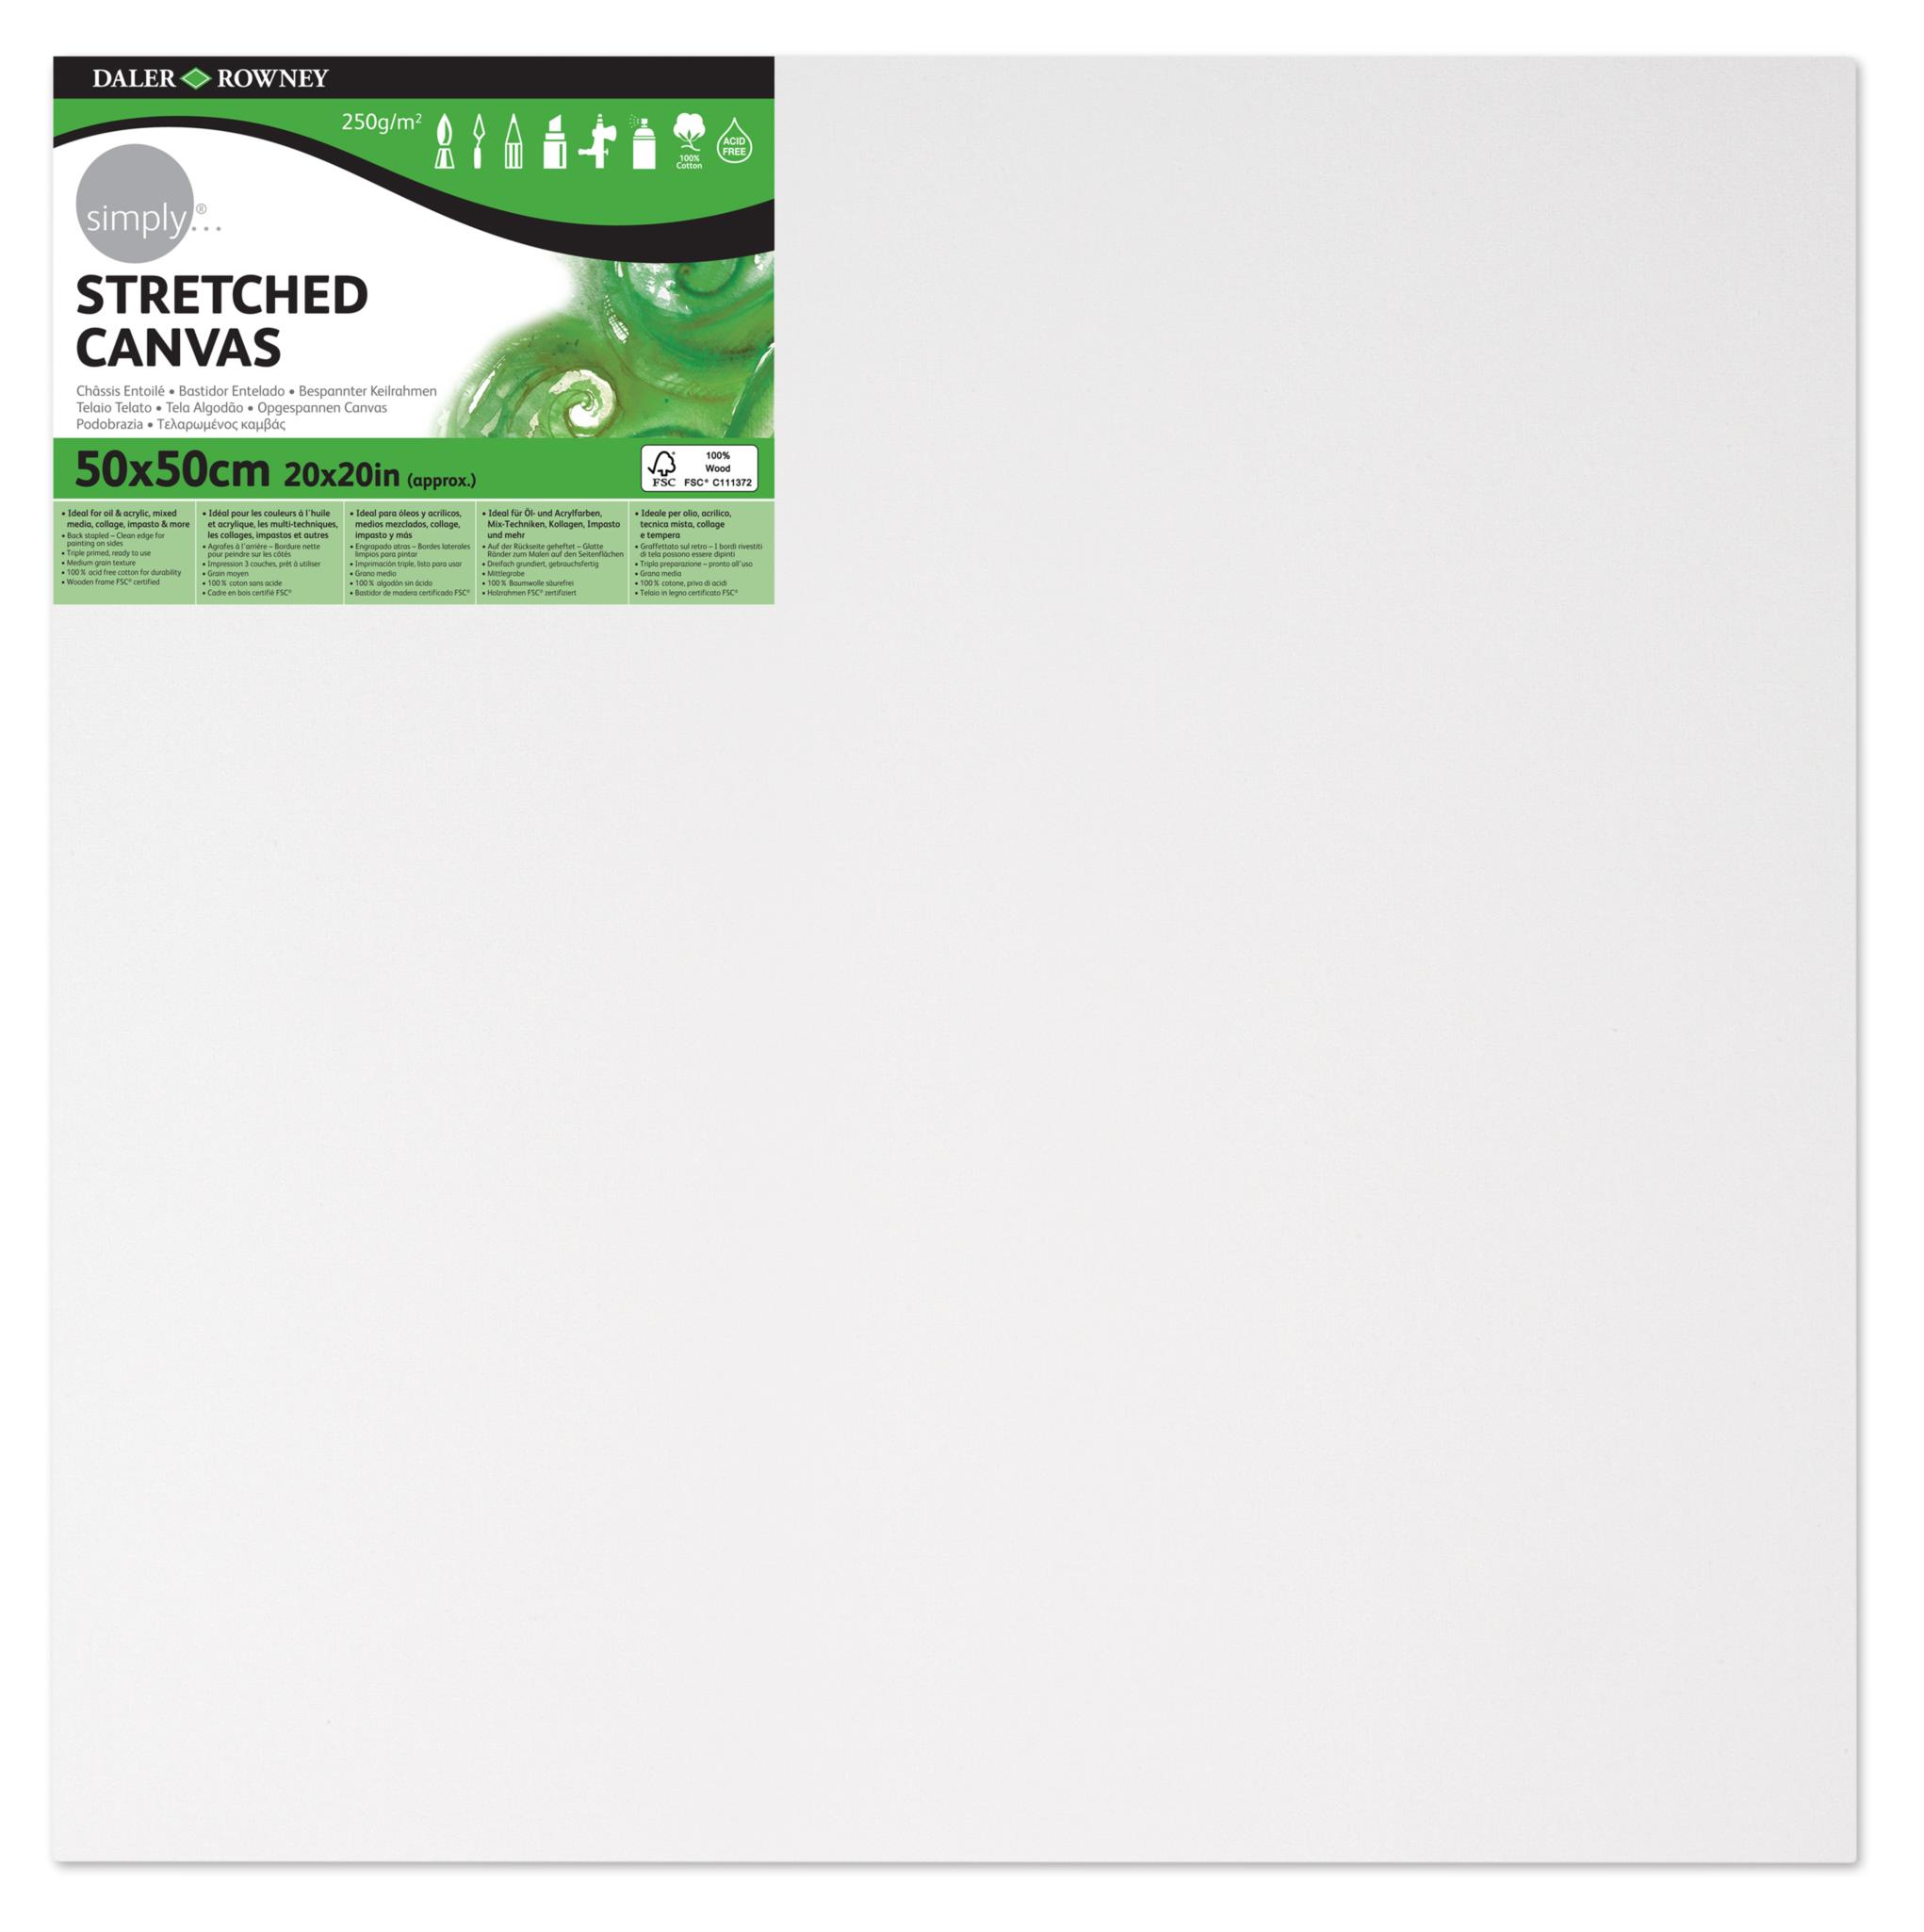 DALER ROWNEY SIMPLY 50 X 50 STRETCHED CANVAS